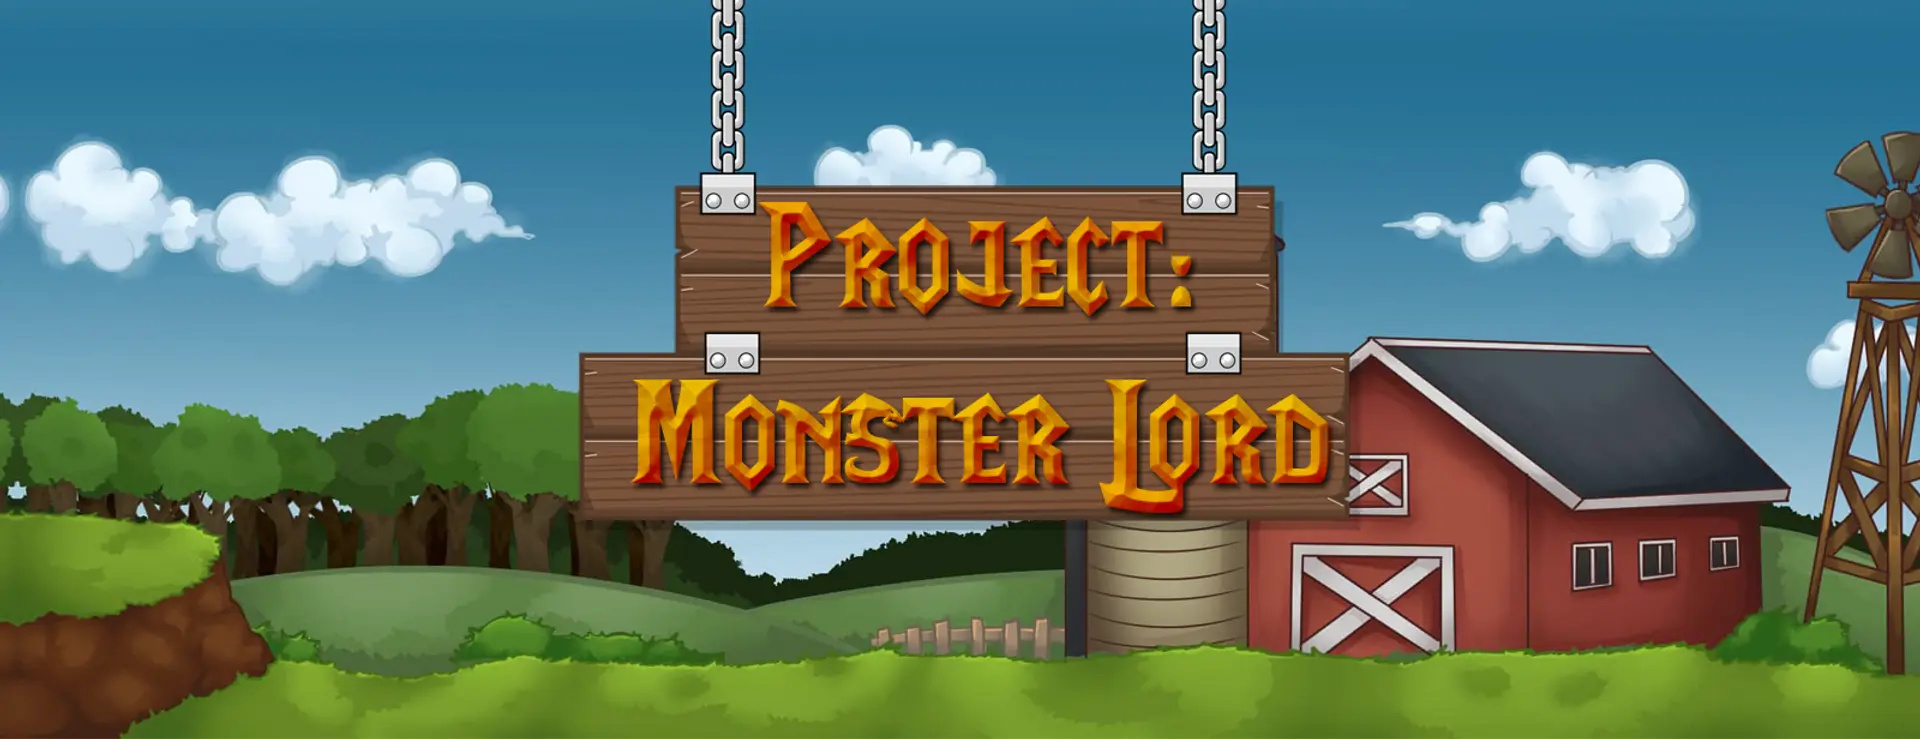 Project monster lord [v2.1.0] main image